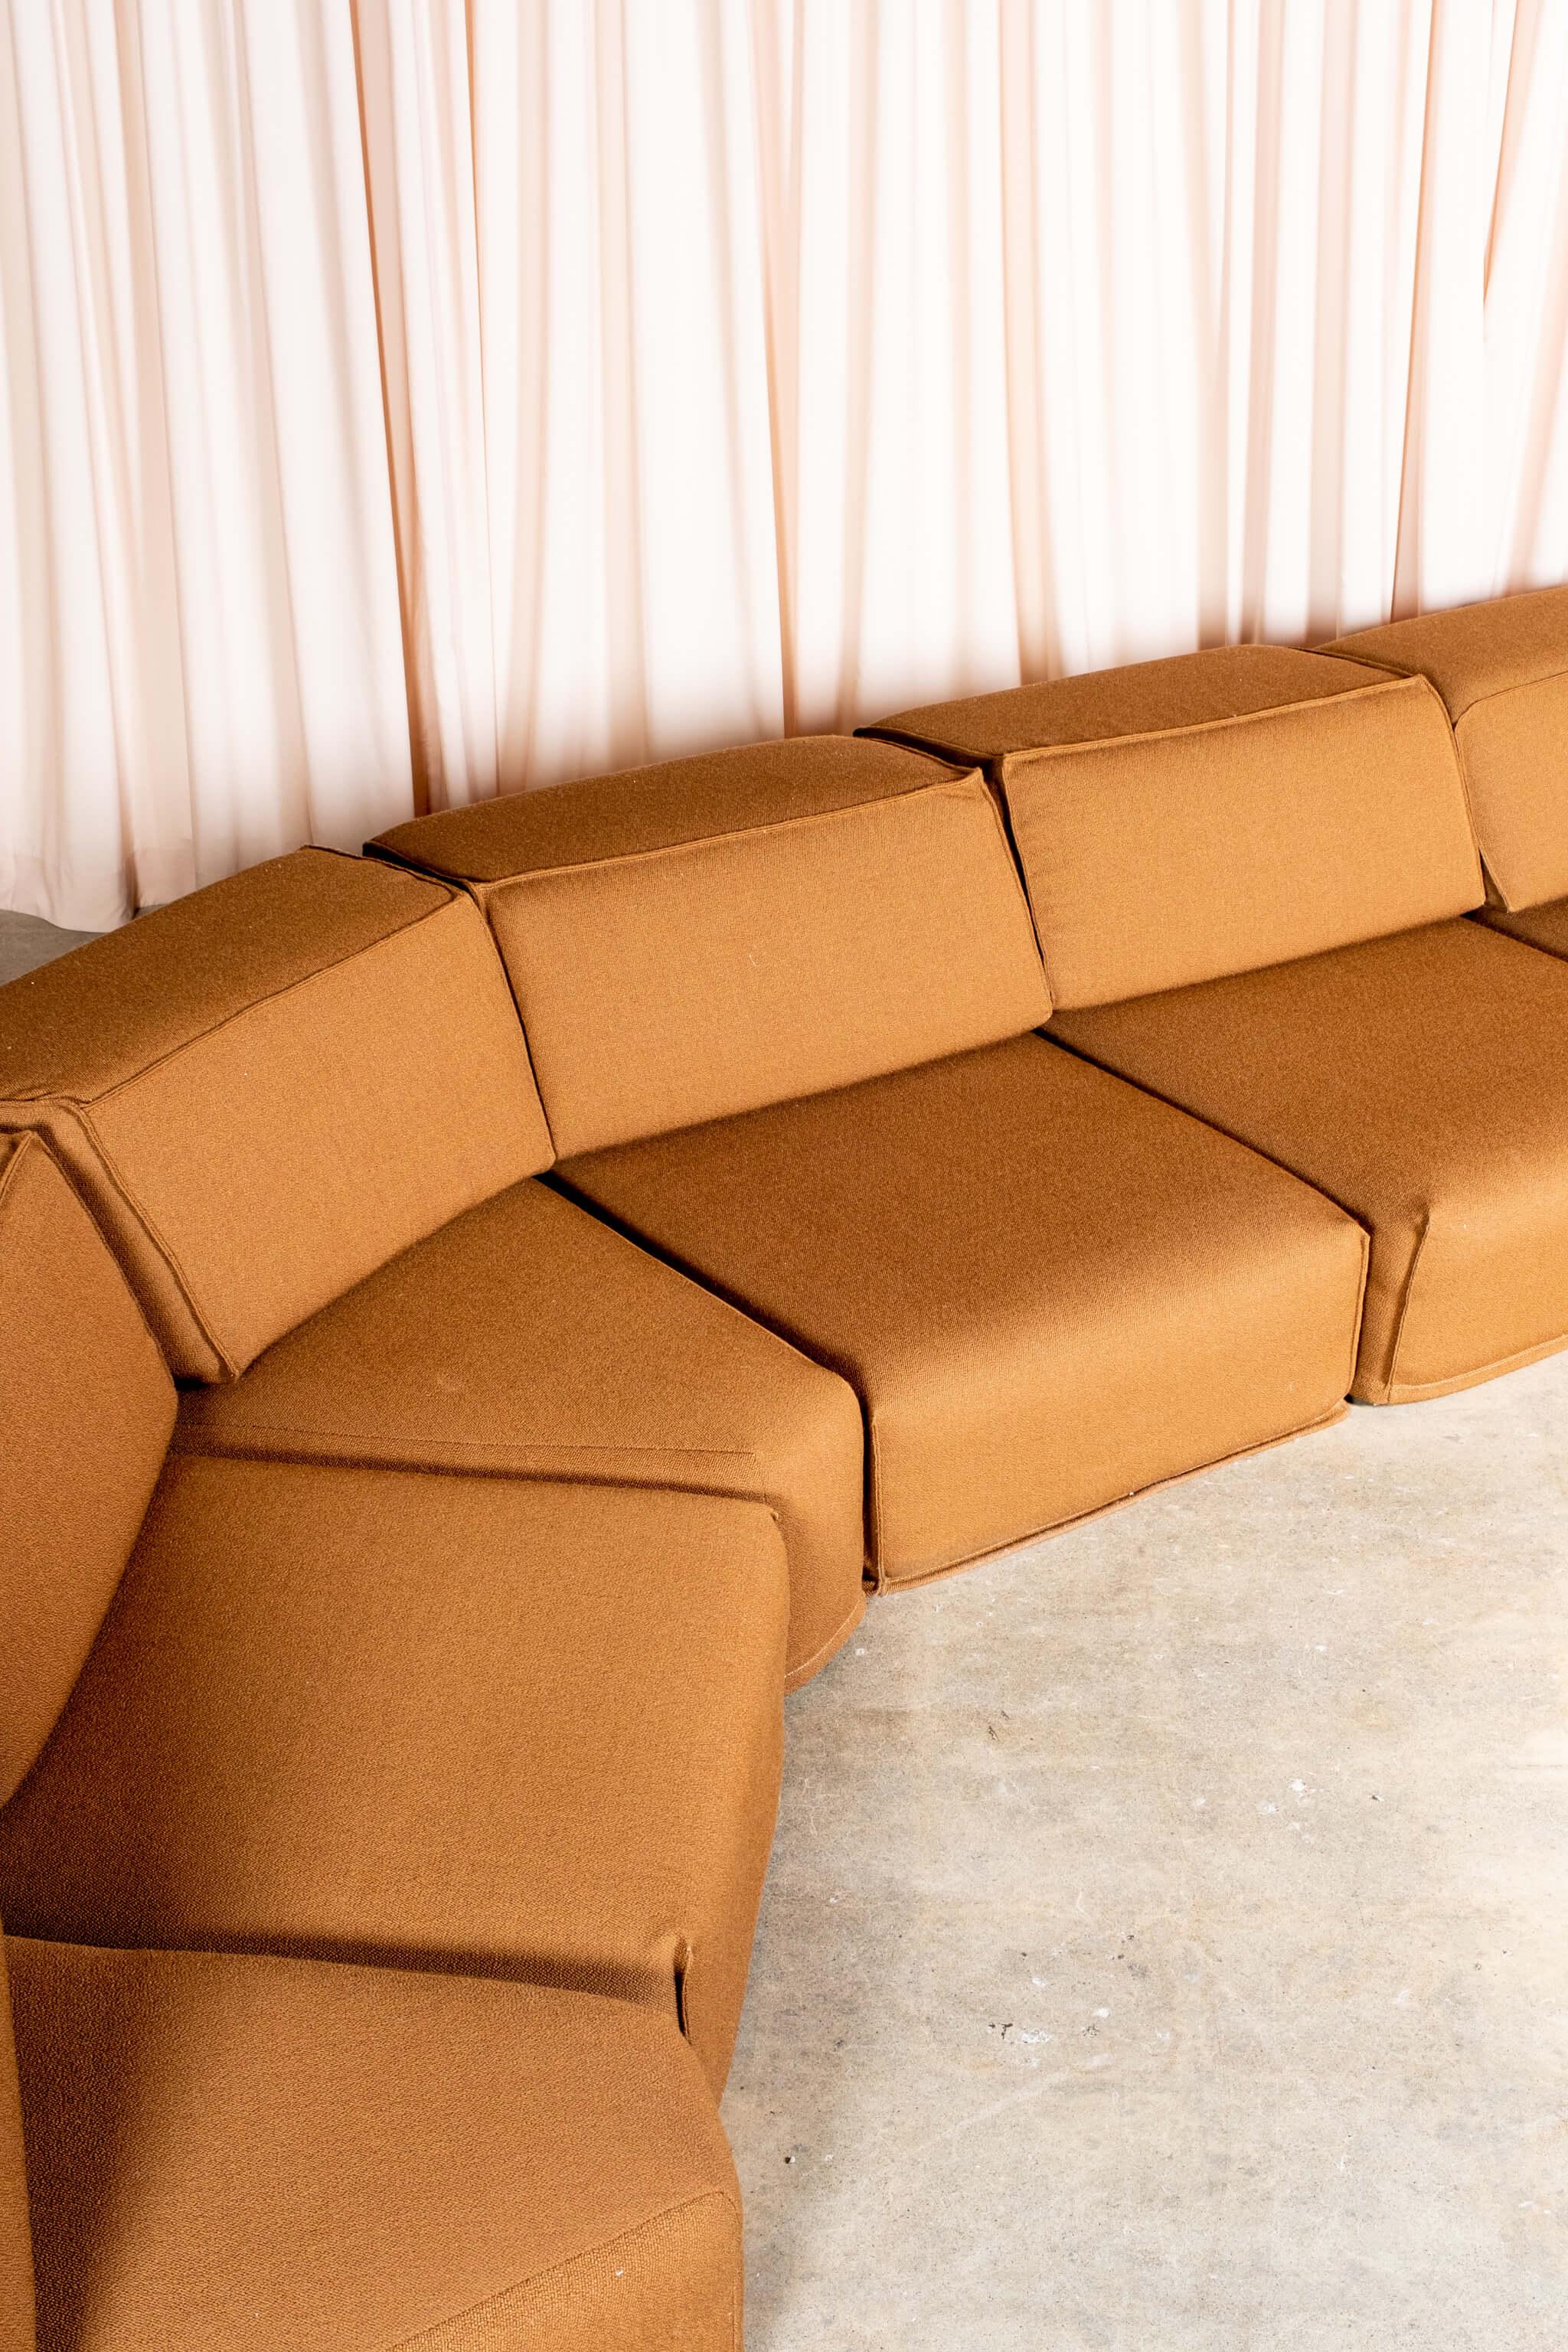 Post-Modern 1970s Cor 'Trio' 8 Piece Modular Sofa by Team Form AG, Newly Reupholstered For Sale